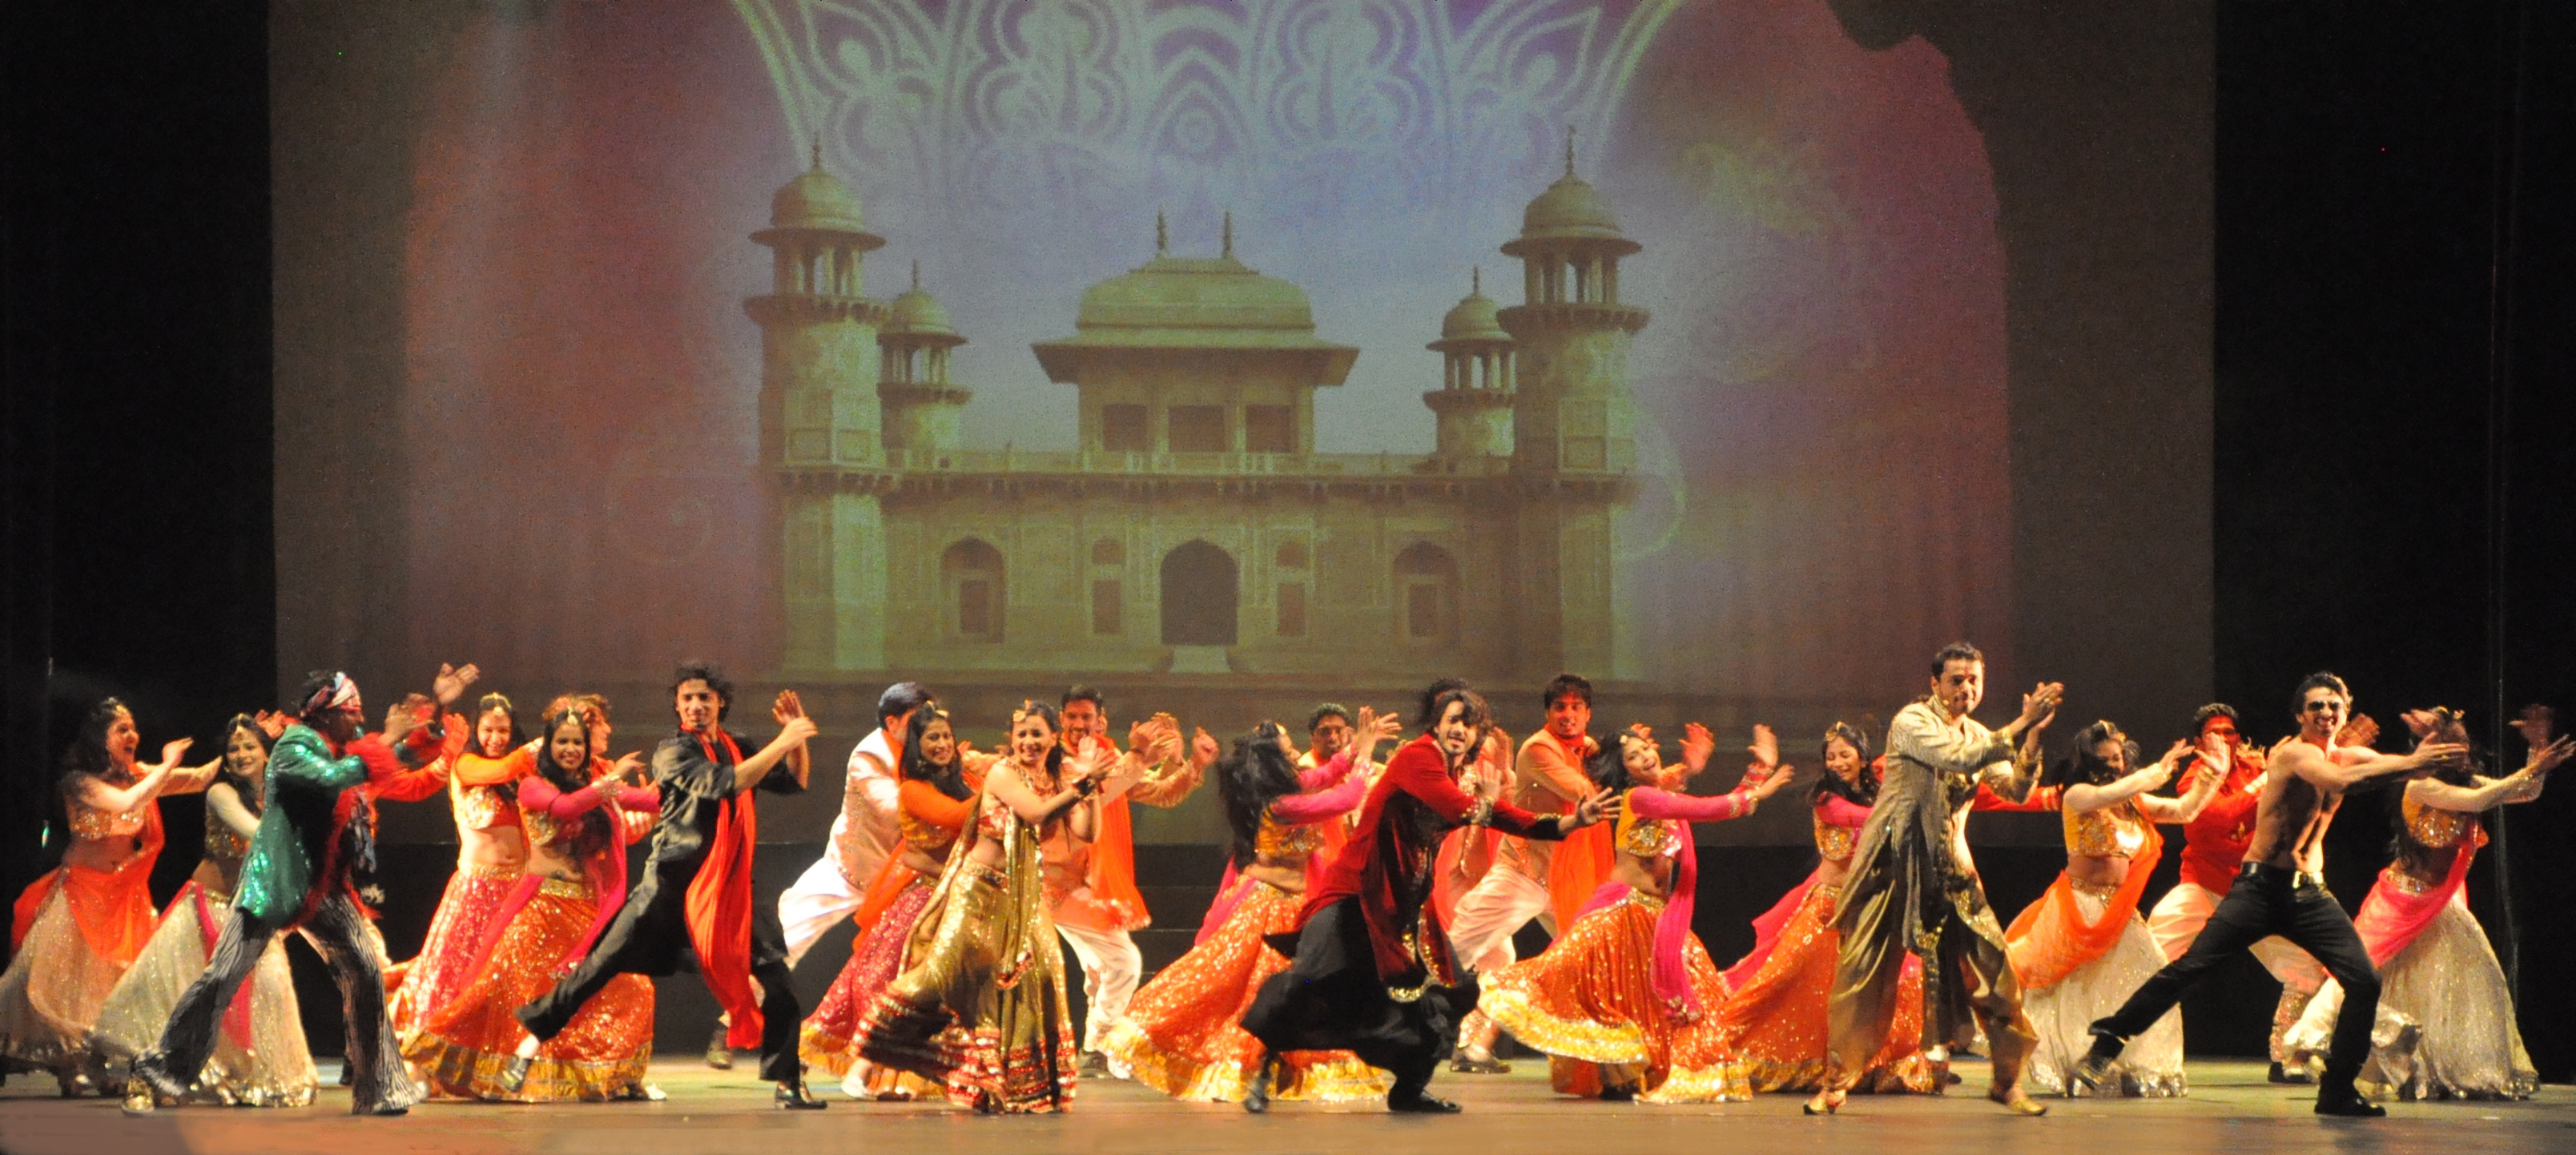 Taj Express-The Bollywood Musical Revue at SMDCAC on Sun., March 5 at 4 PM